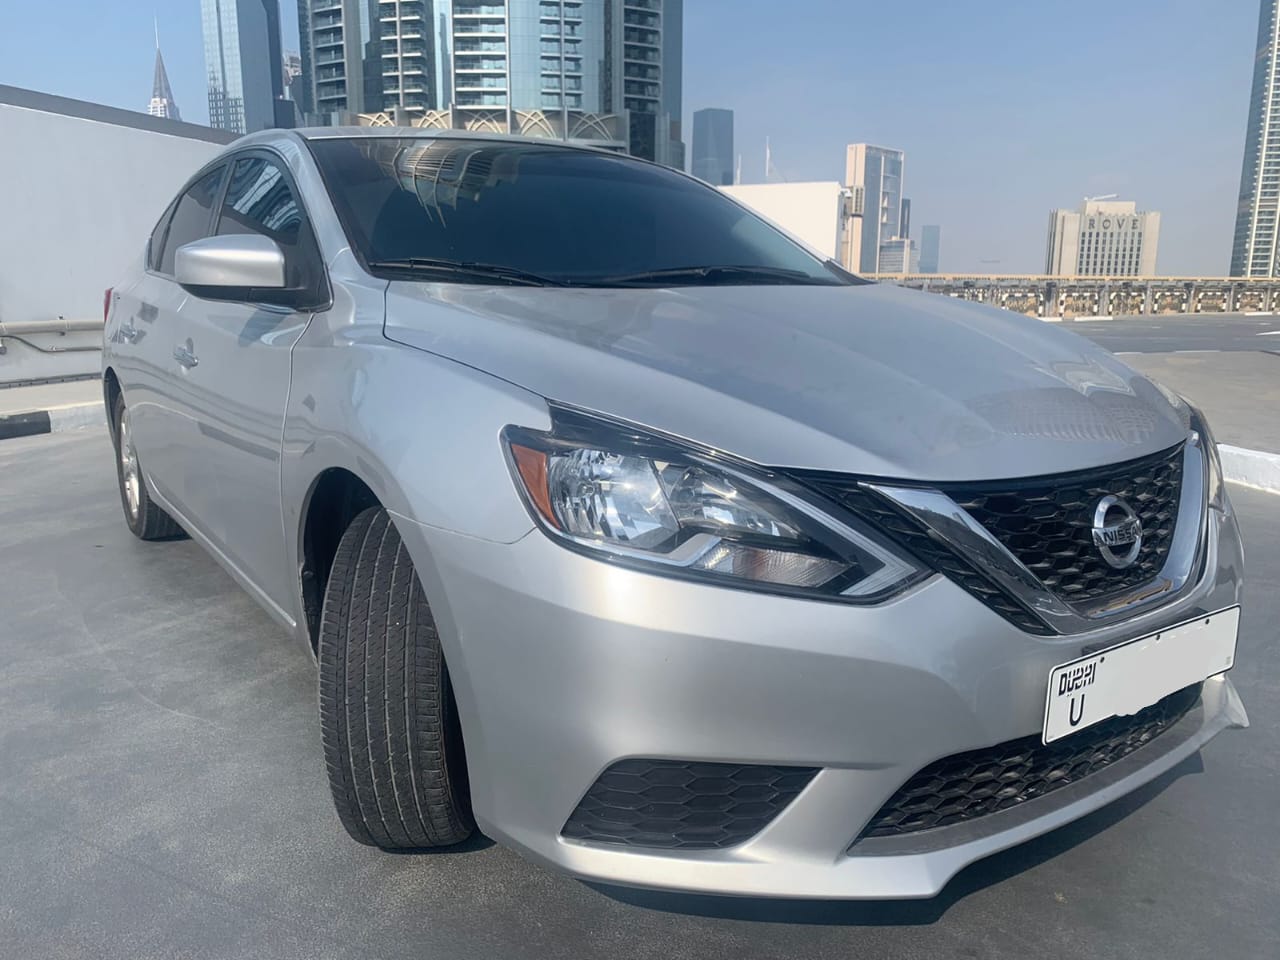 Nissan Sentra 2019 In Mint Condition For Sale